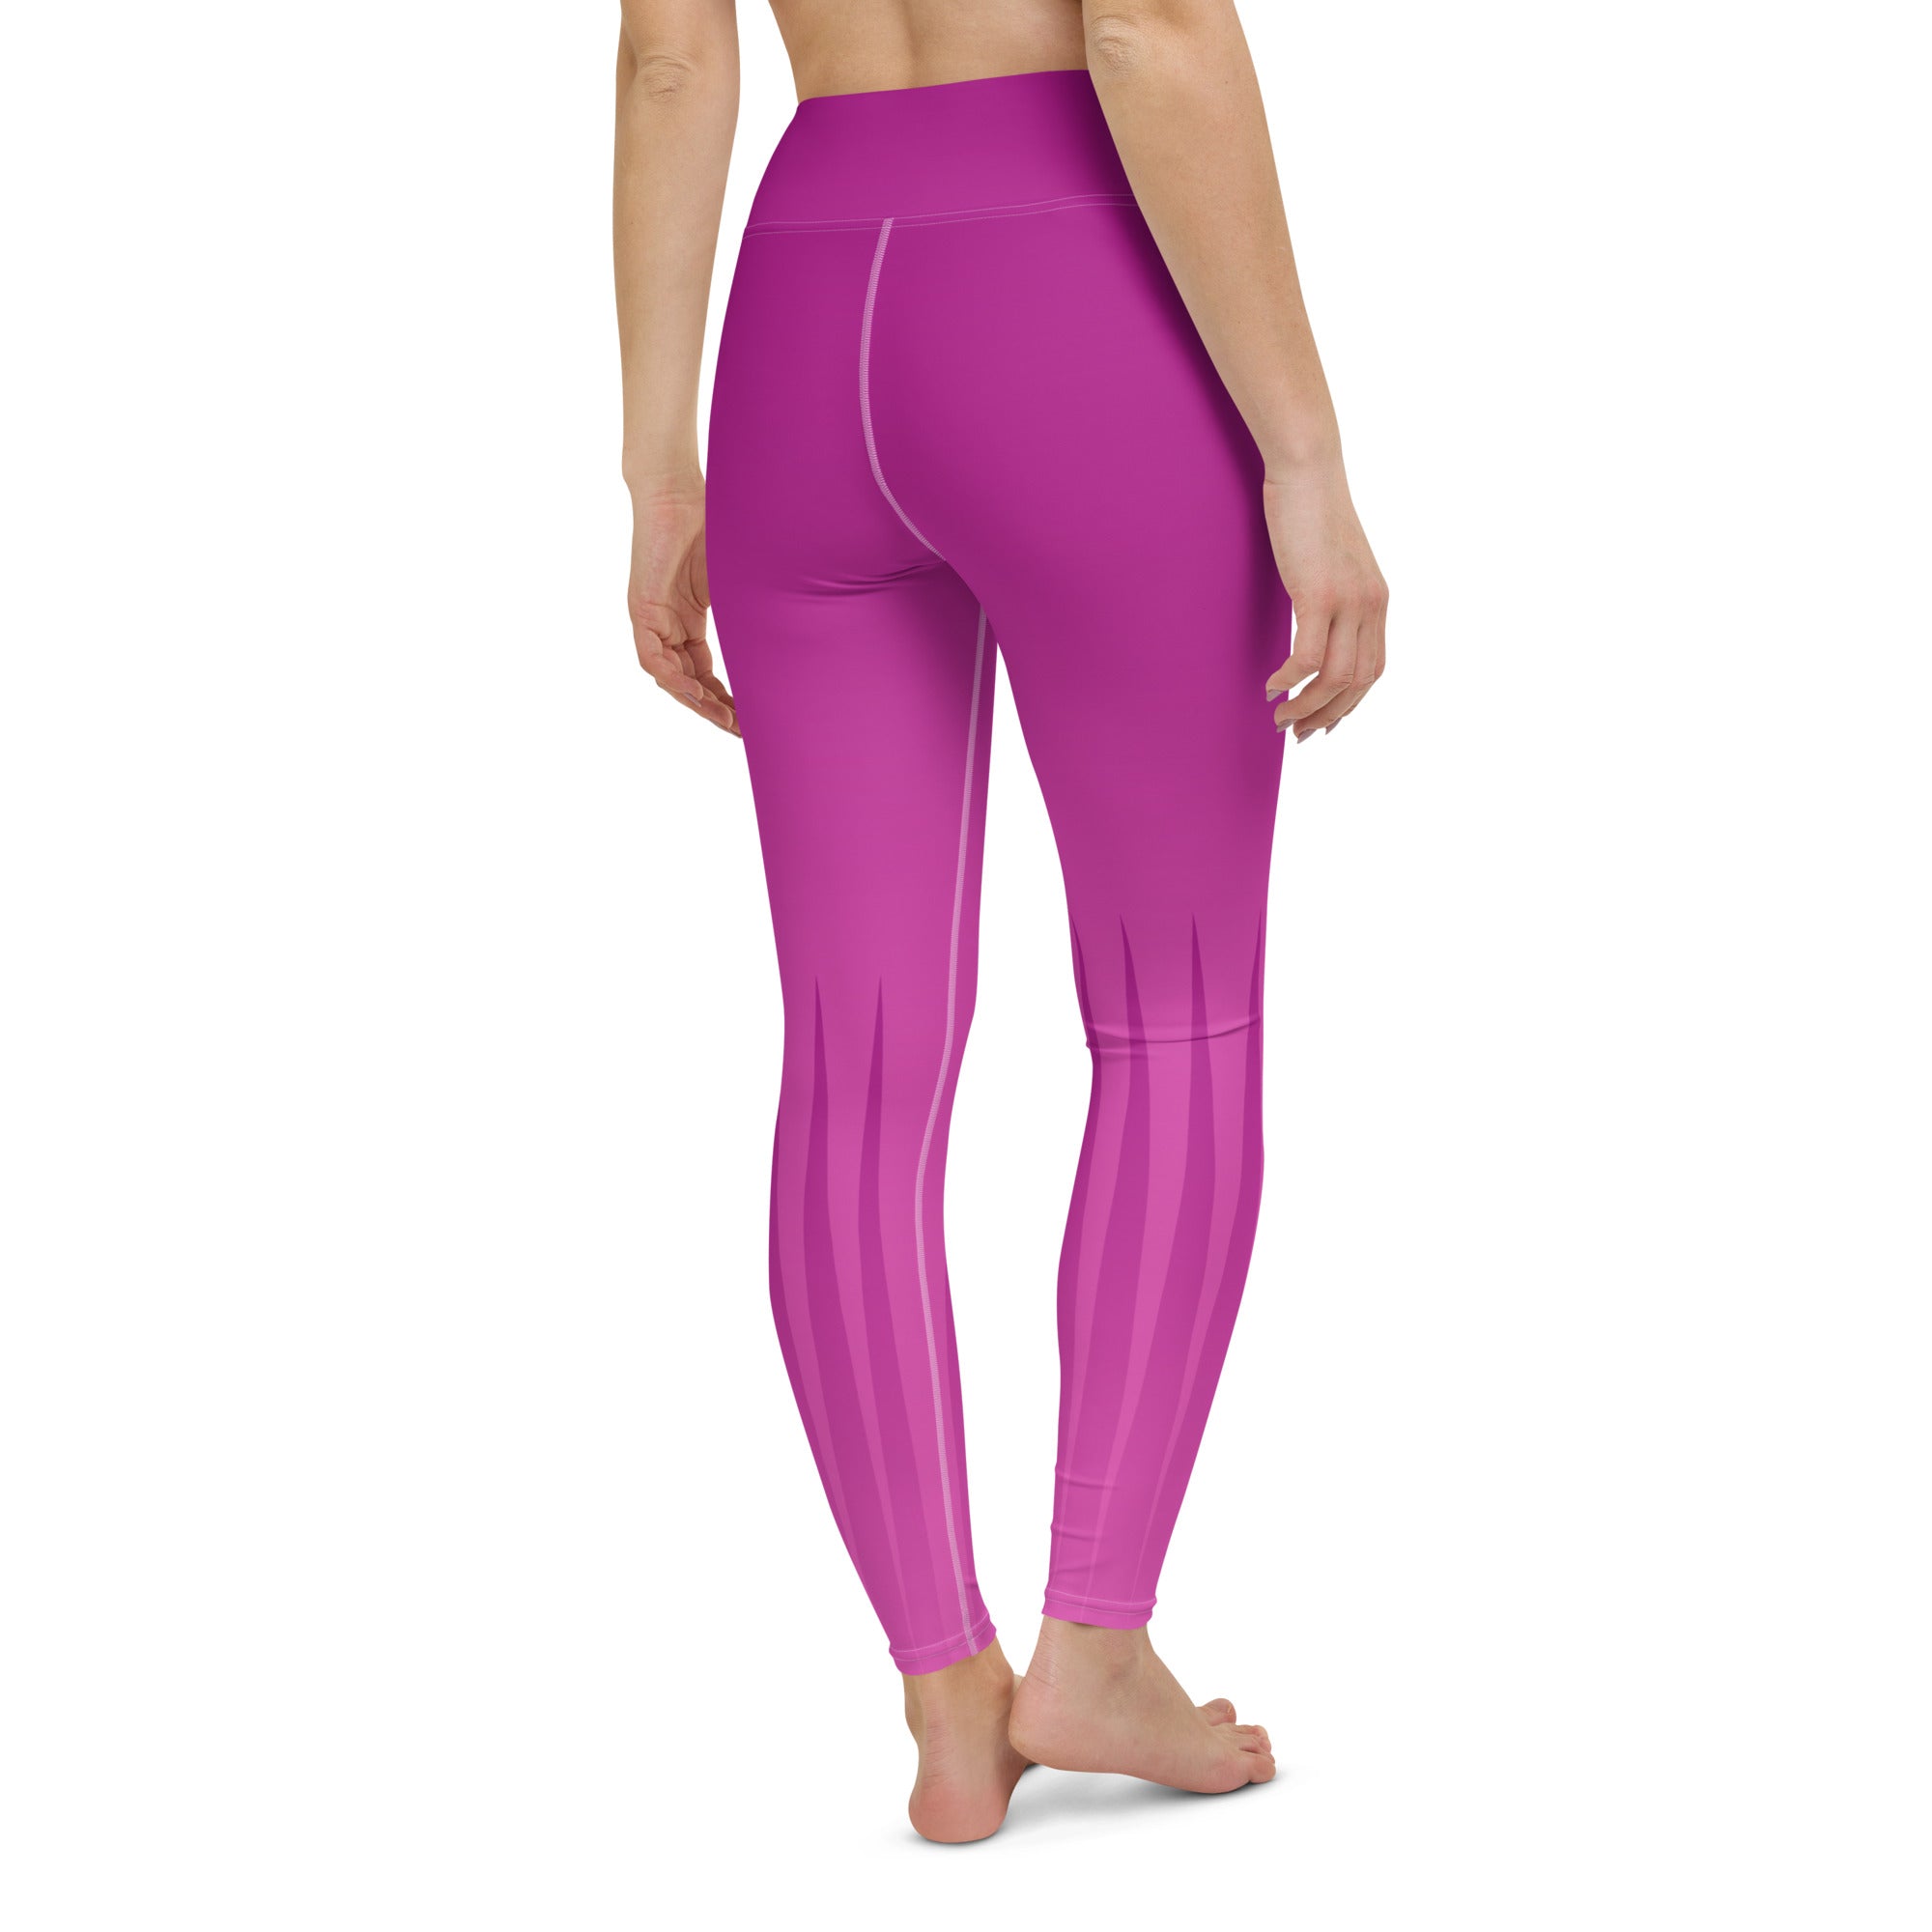 Bring the ocean's tranquility to the mat with these Coral Reef inspired yoga leggings, designed for comfort and style.